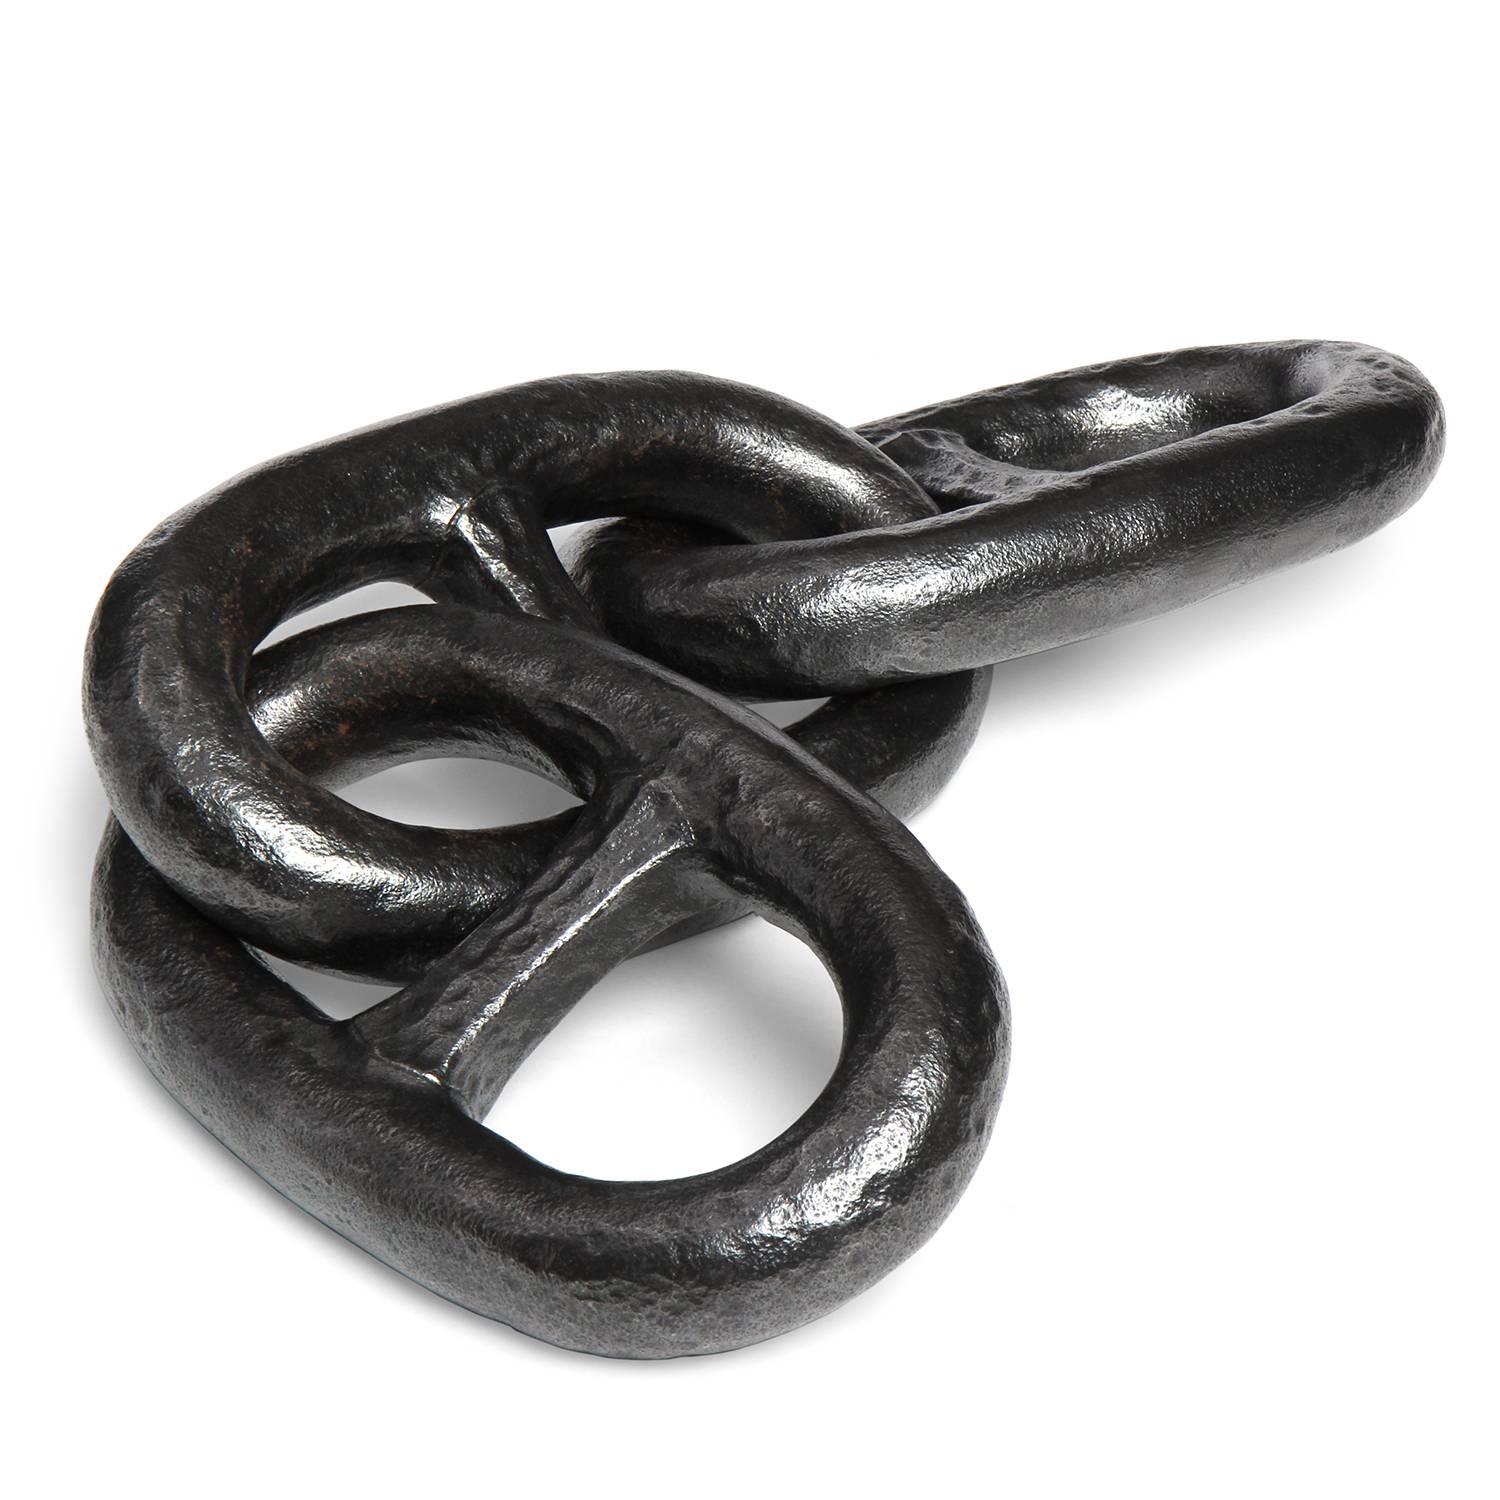 A group of three large connected patinated forged iron chain links.